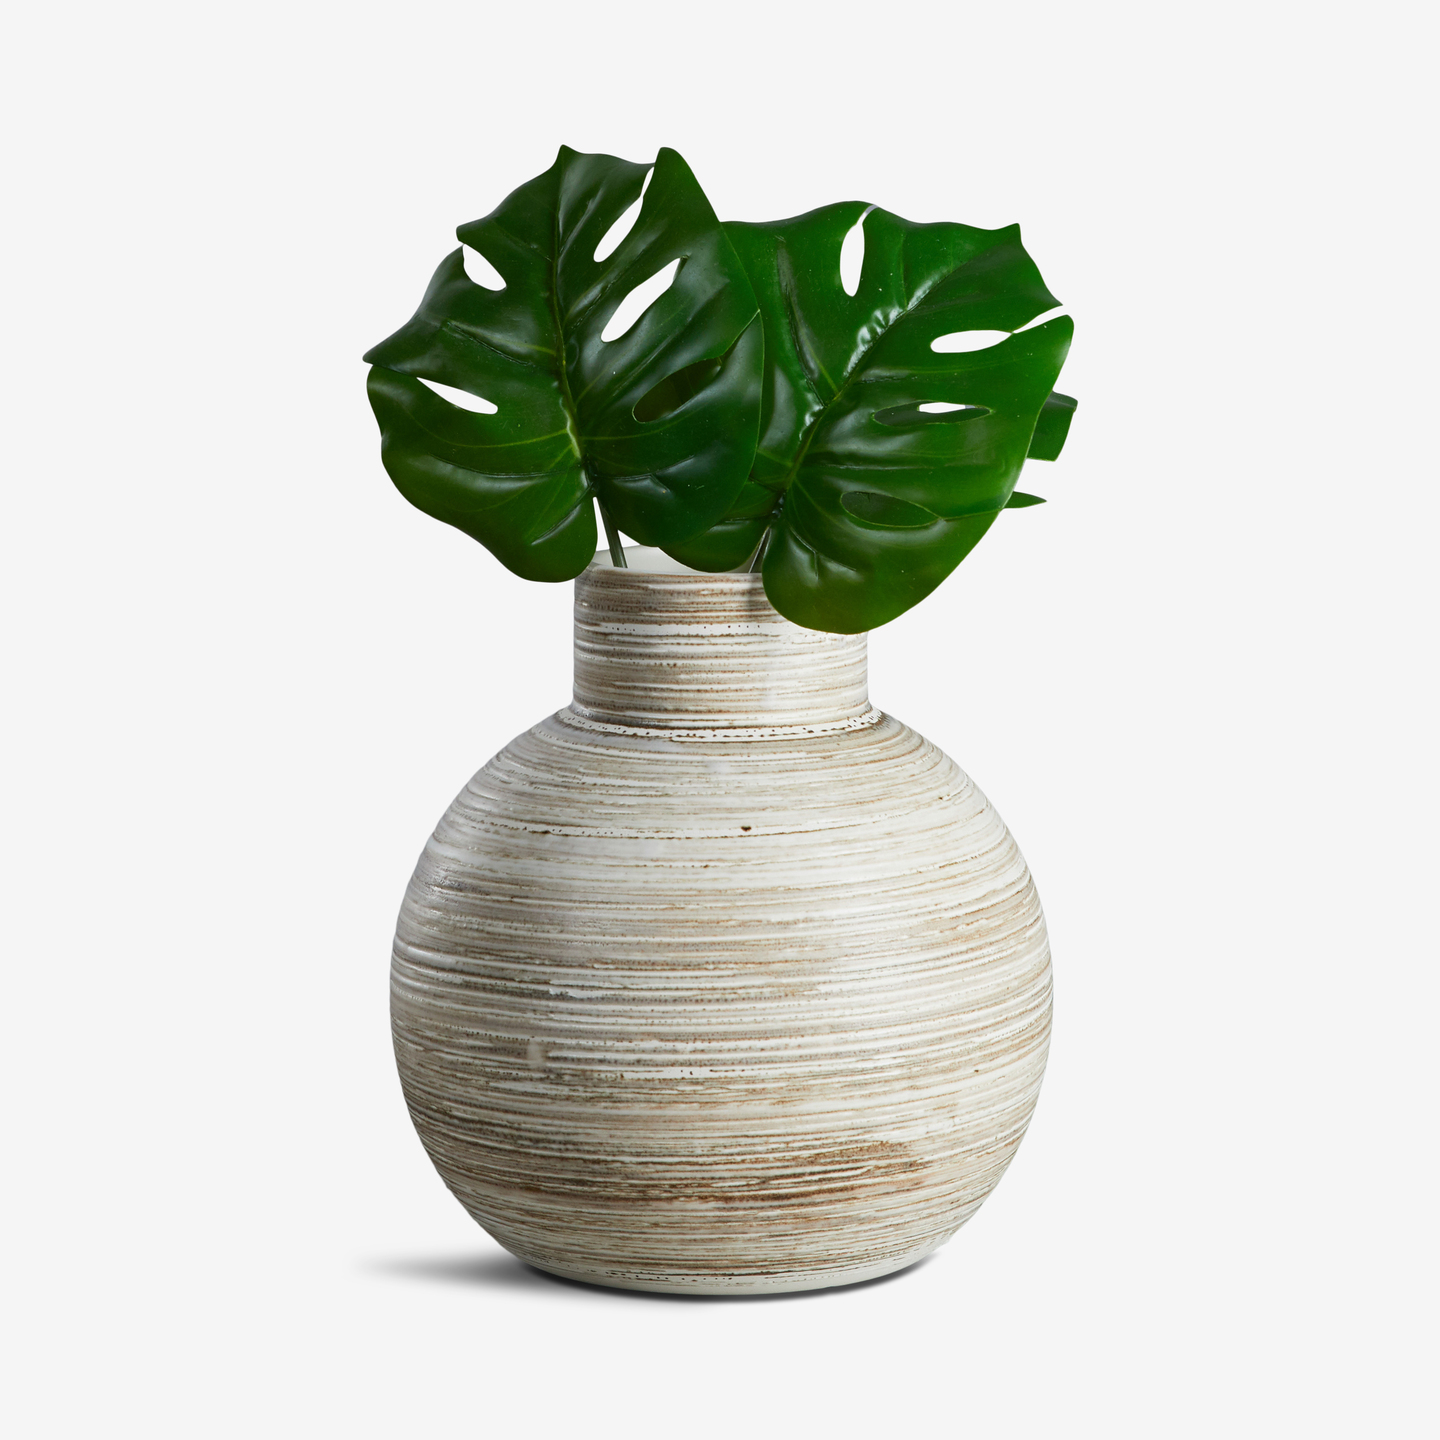 716_Cove-Short-Circular-Vase_With-Leaf_California-Chic_Dining-Room-17 2020